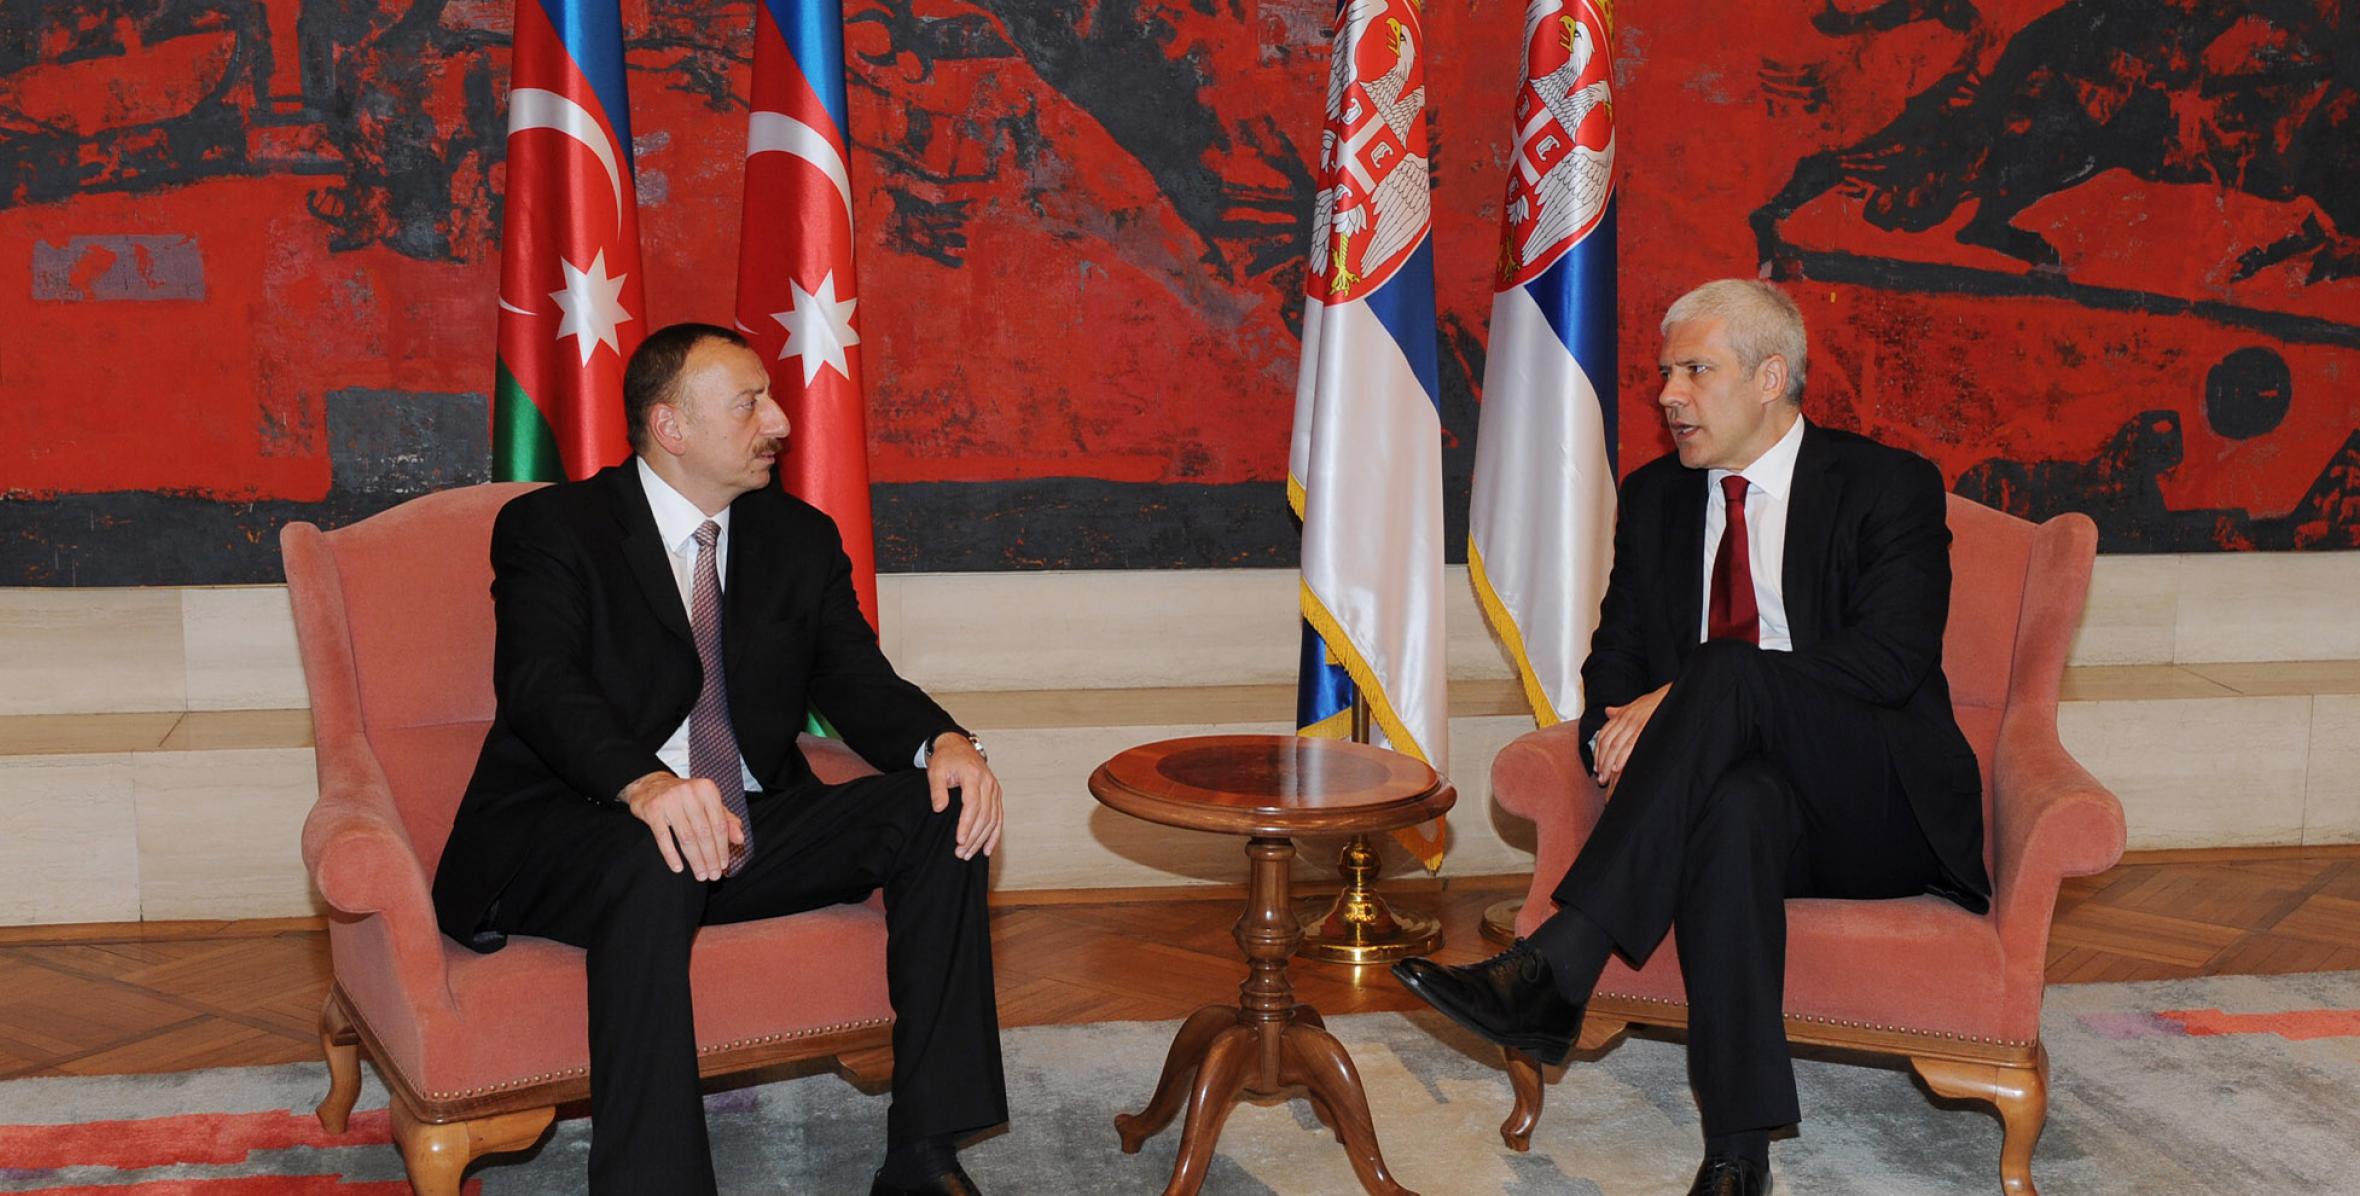 Ilham Aliyev and Serbian President Boris Tadic had a face-to-face meeting